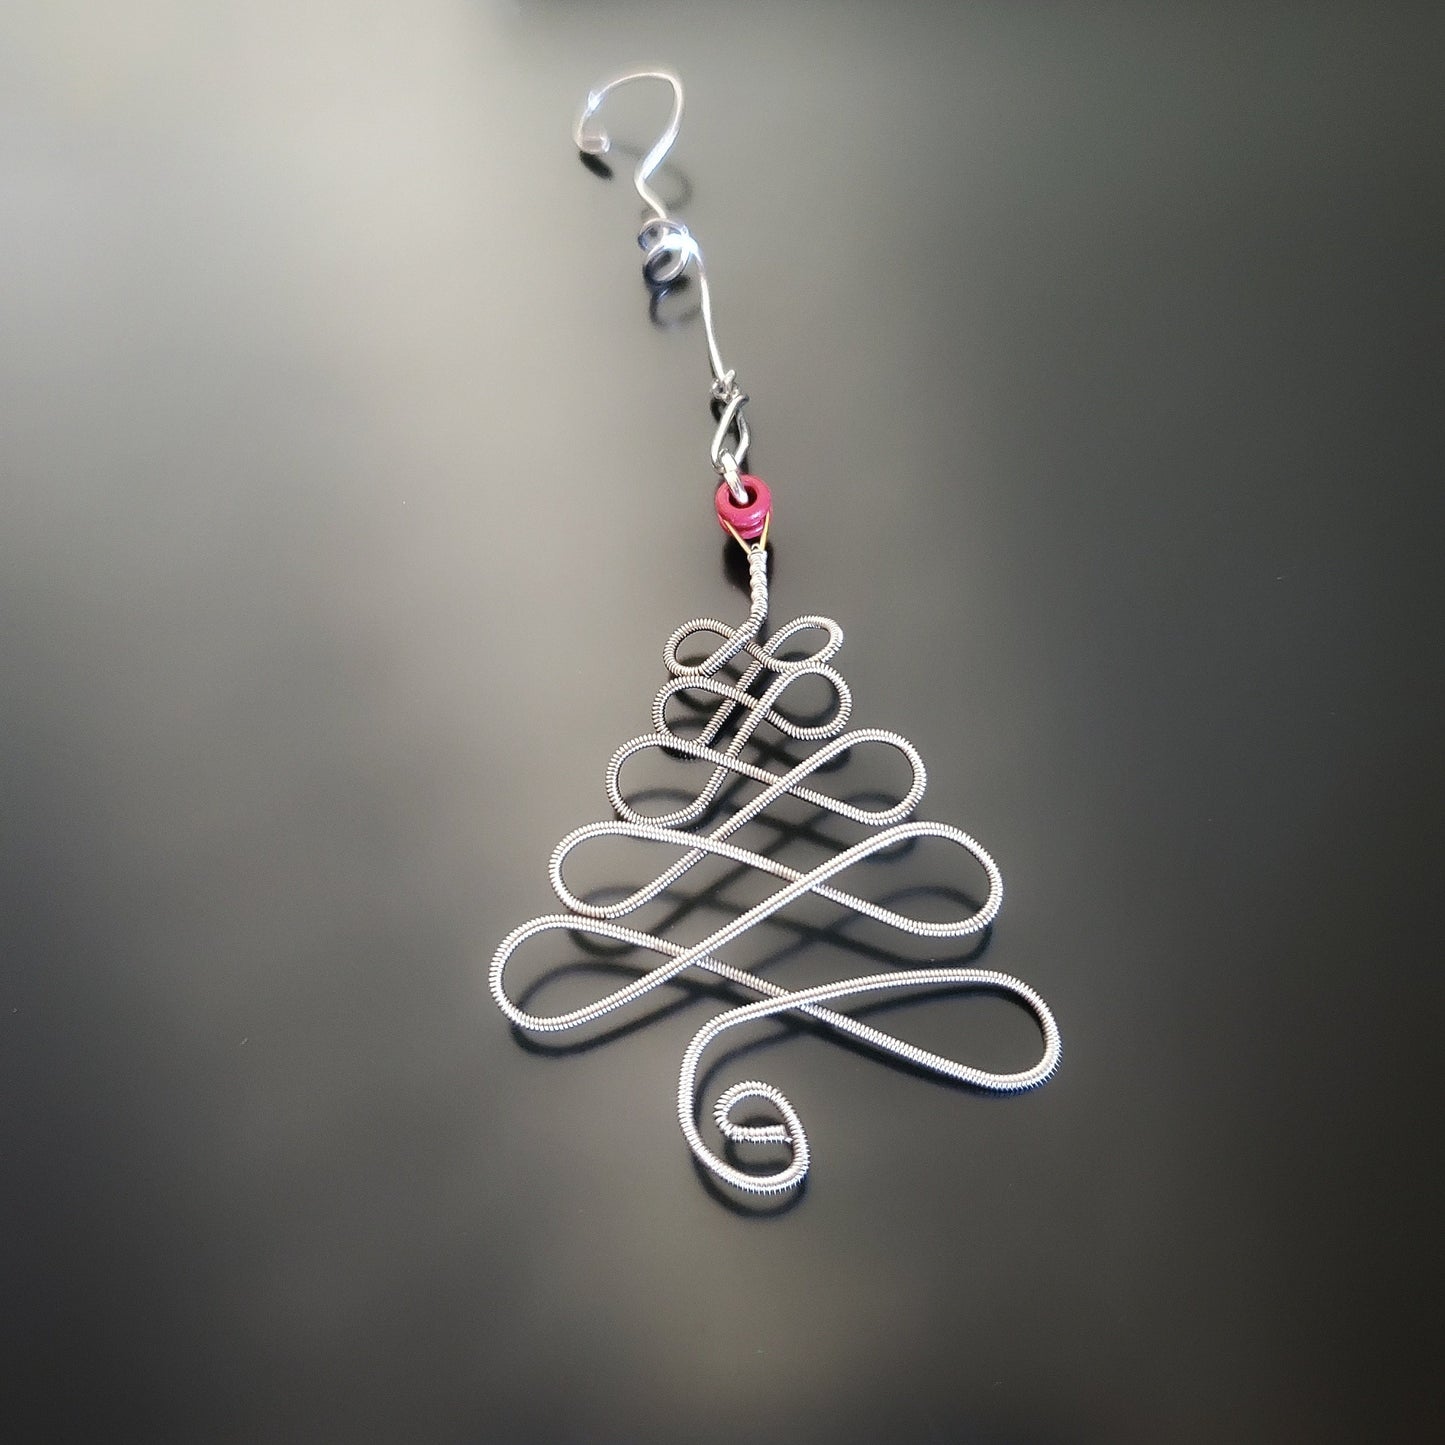 a silver coloured christmas decoration in the shape of a christmas tree made from an upcycled guitar string next to a light blue guitar pick on which there is a white circle and a picture of a black guitar - black and grey background